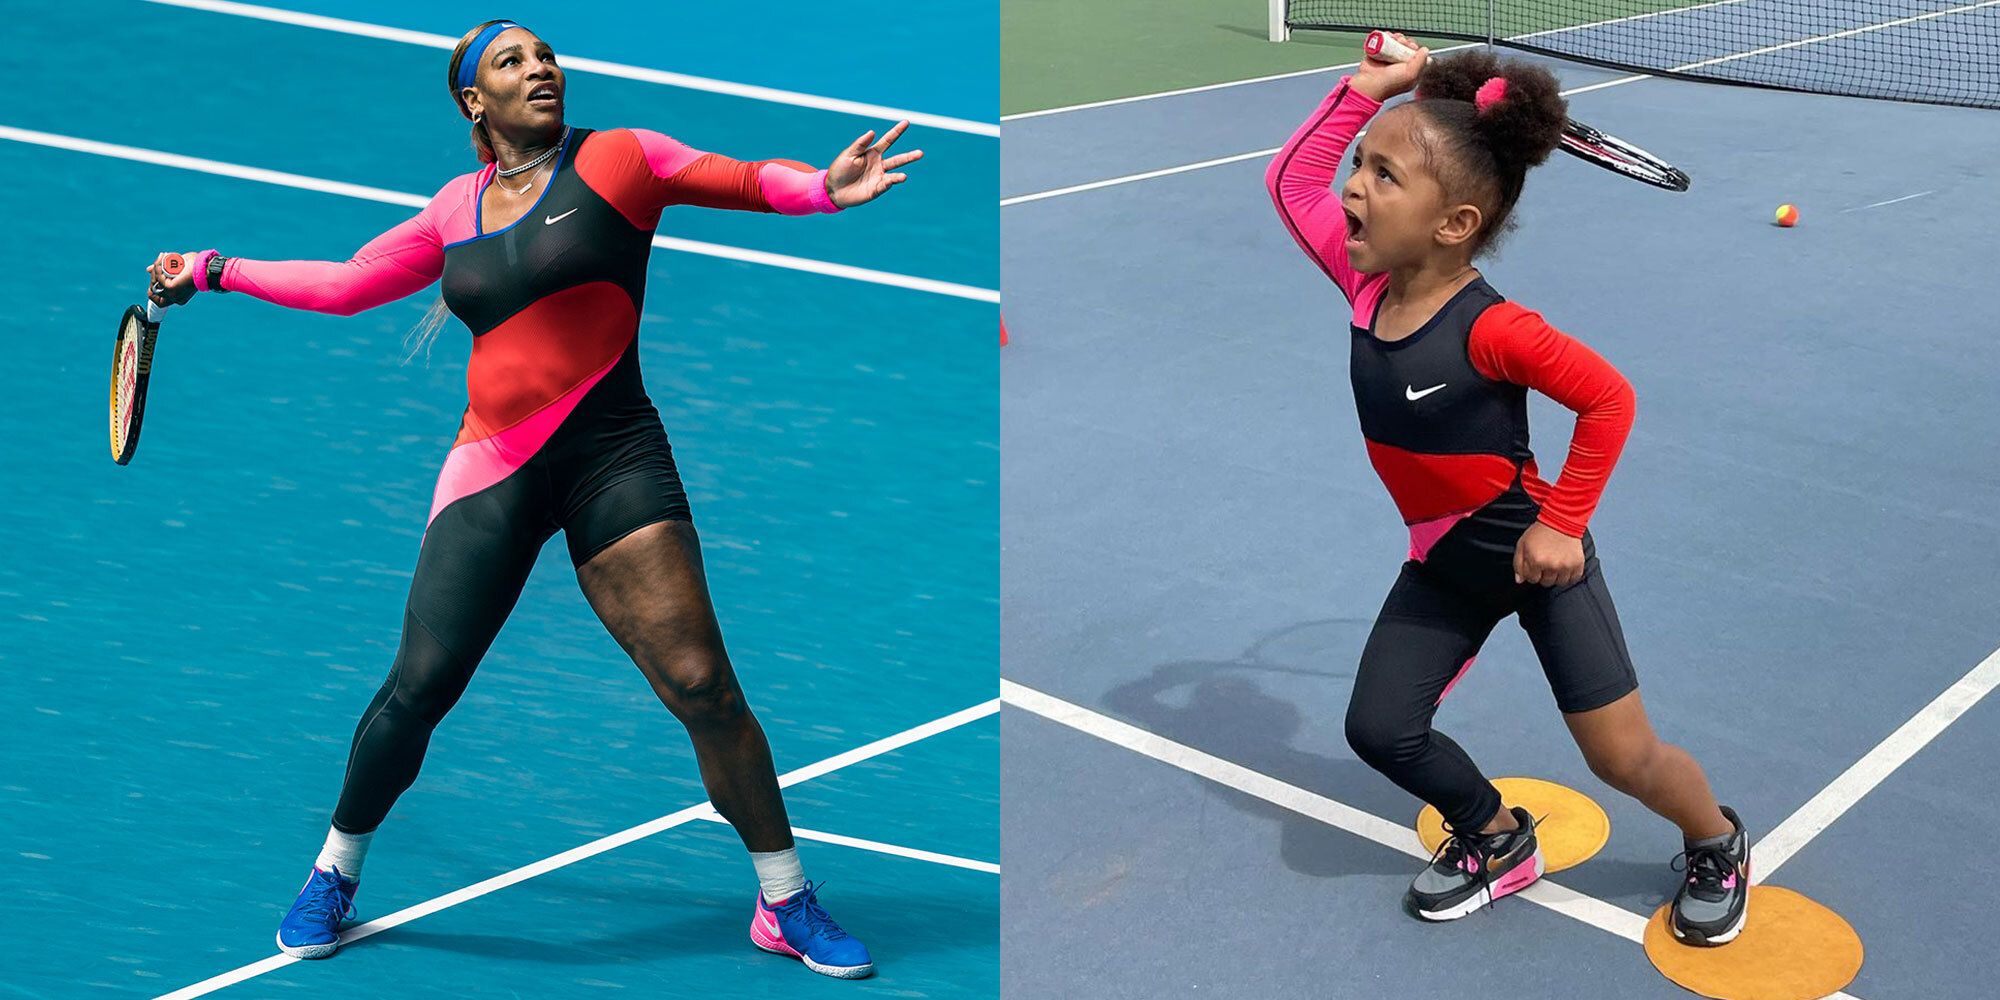 Serena Williams is right – there's no shame in dieting to fit into